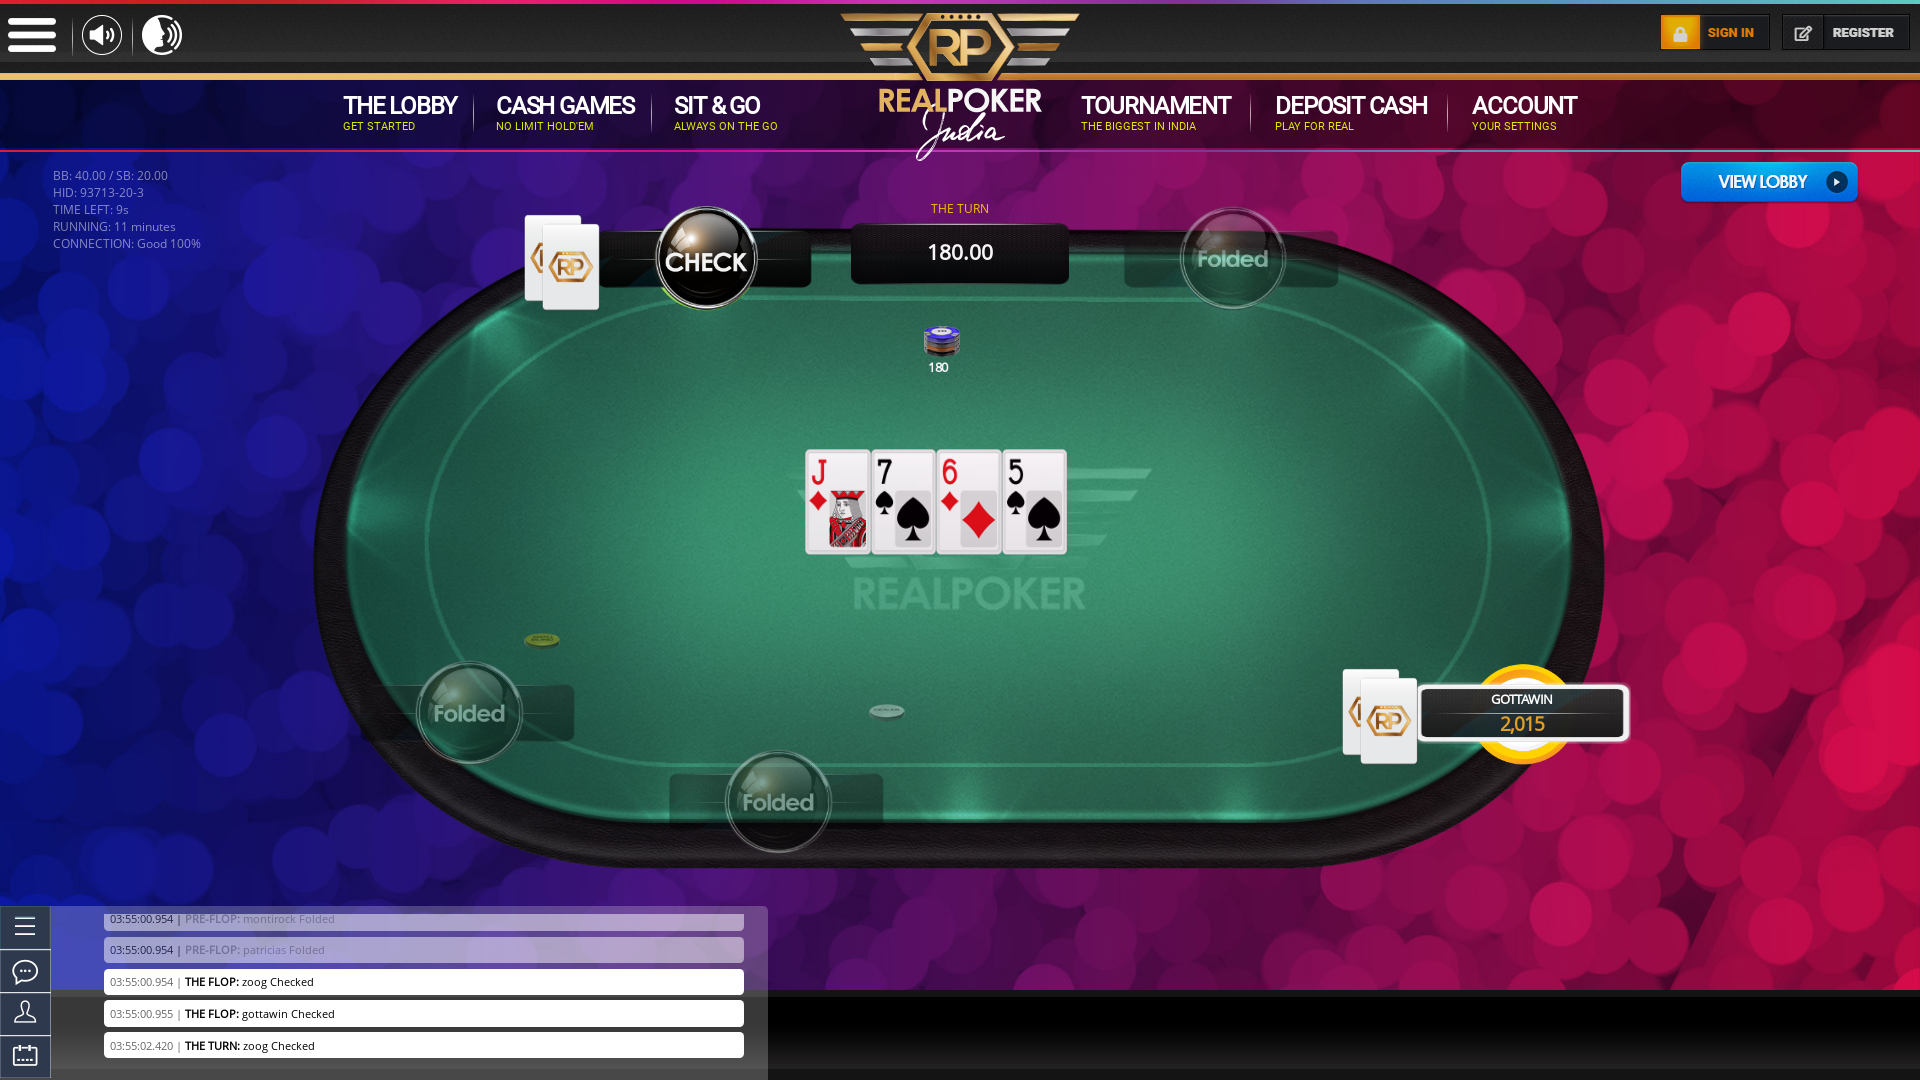 Real poker 10 player table in the 11th minute of the match